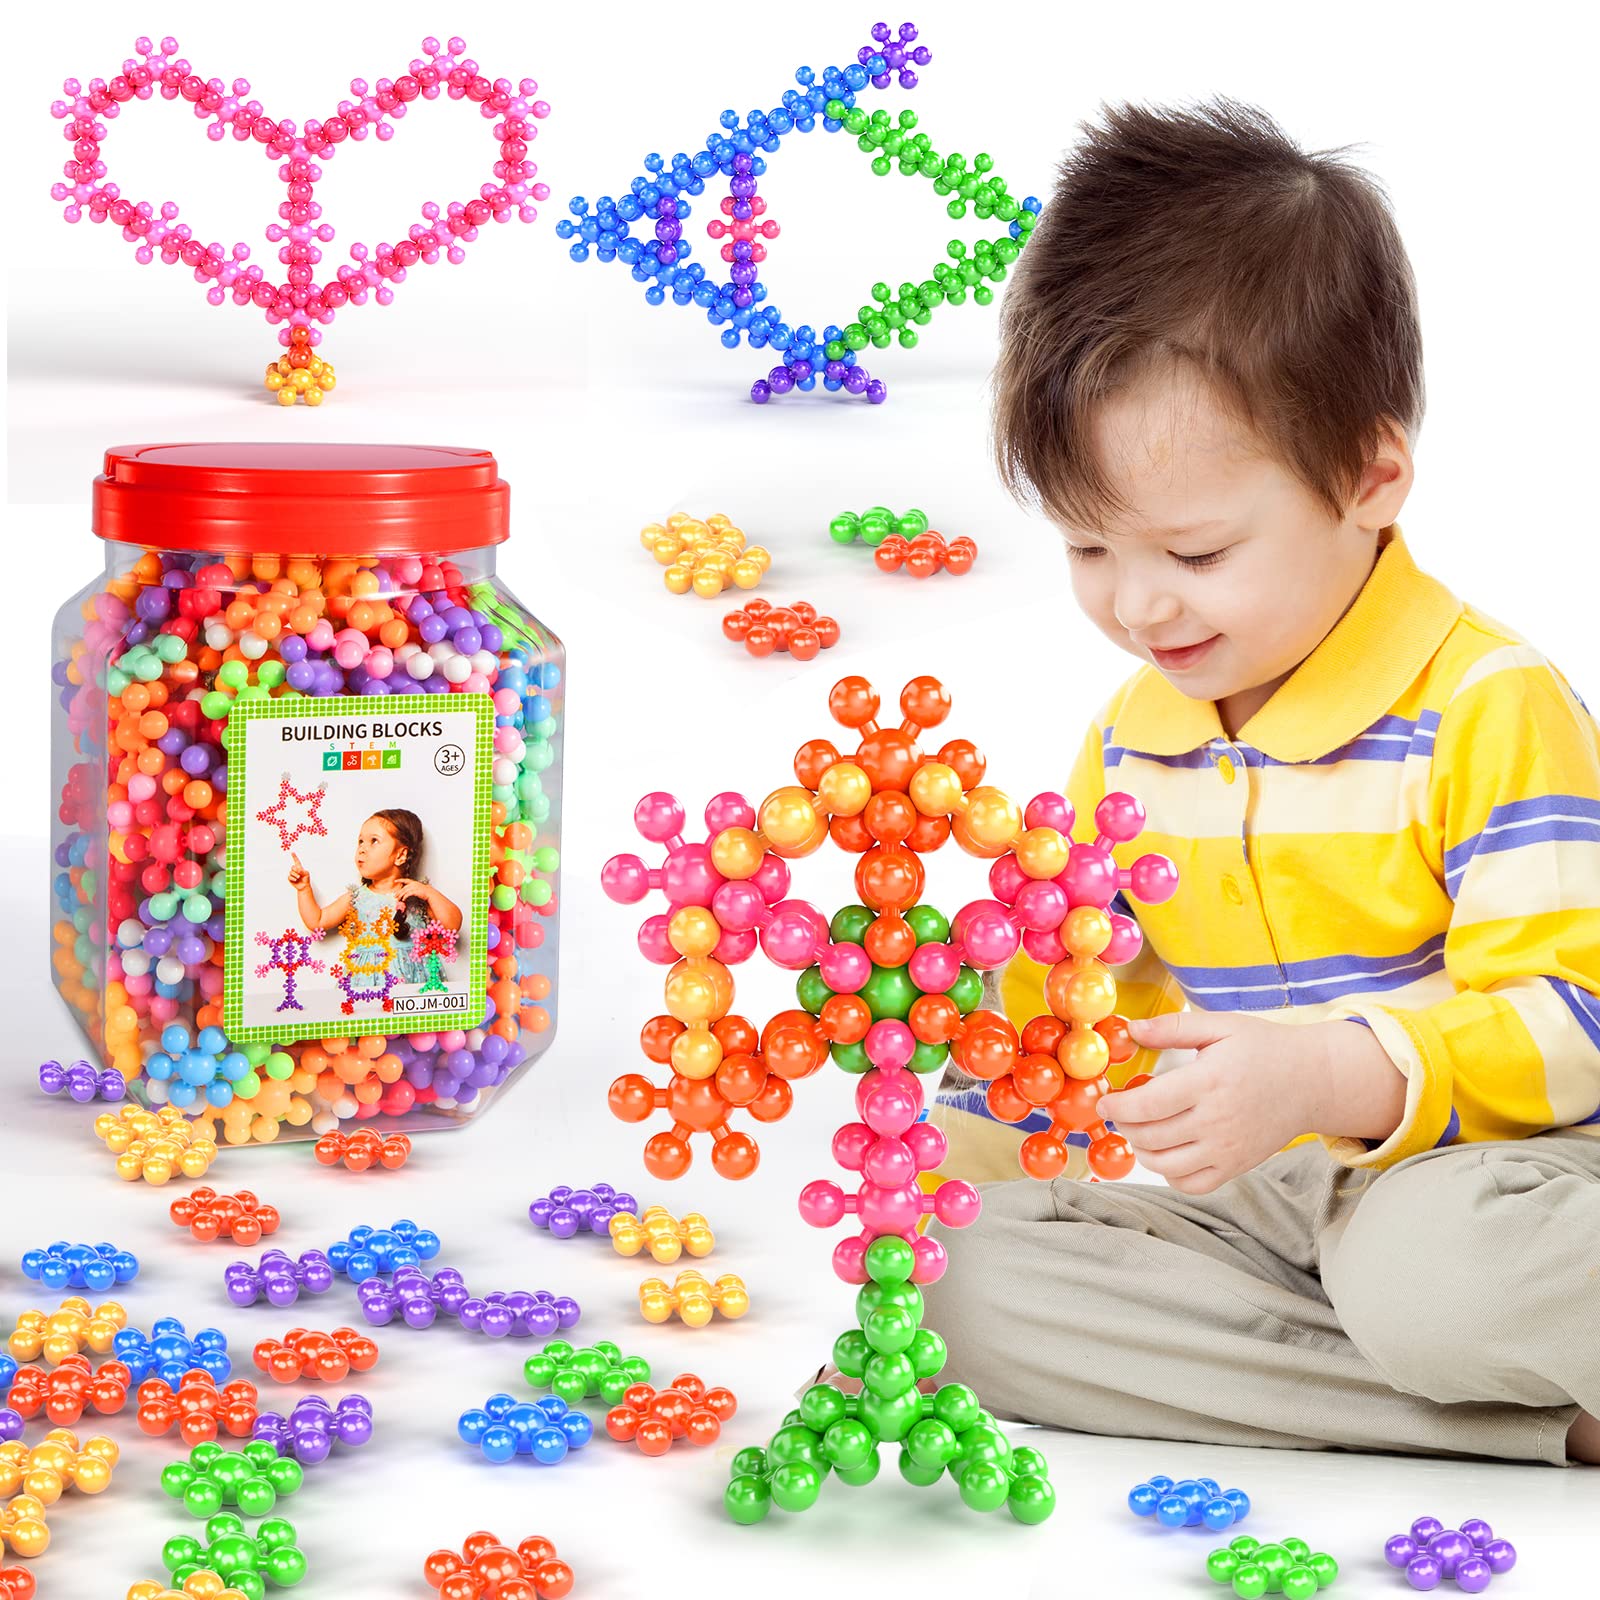 Babyhome 400 Pieces Building Blocks Kids STEM Toys, Interlocking Solid Plastic Educational Toys Sets for Preschool Kids Boys and Girls Aged 3+, Safe Material Creativity Kids Toys